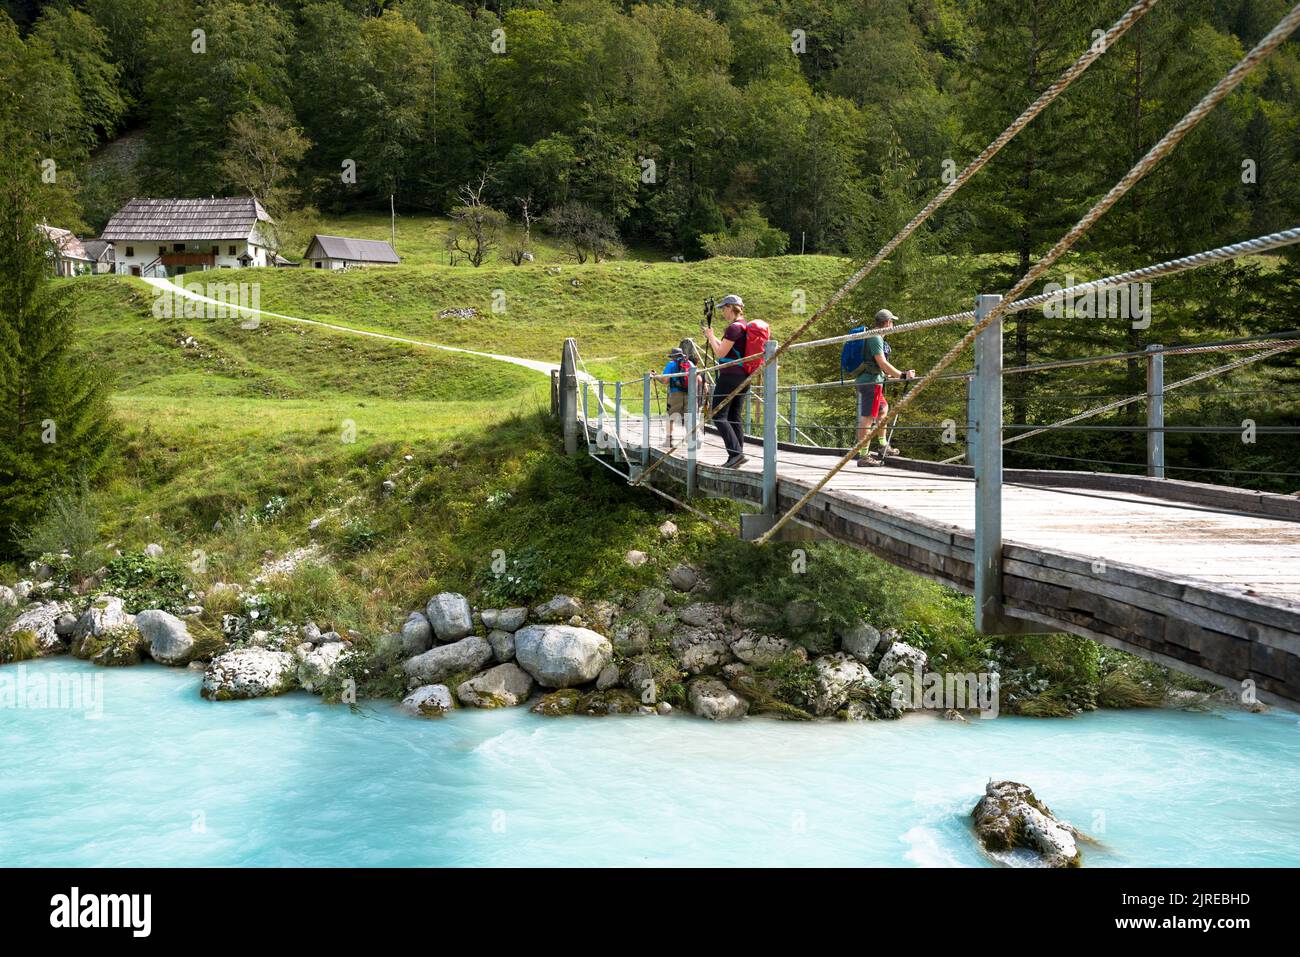 Tourists standing on a hanging bridge across mountain river Stock Photo